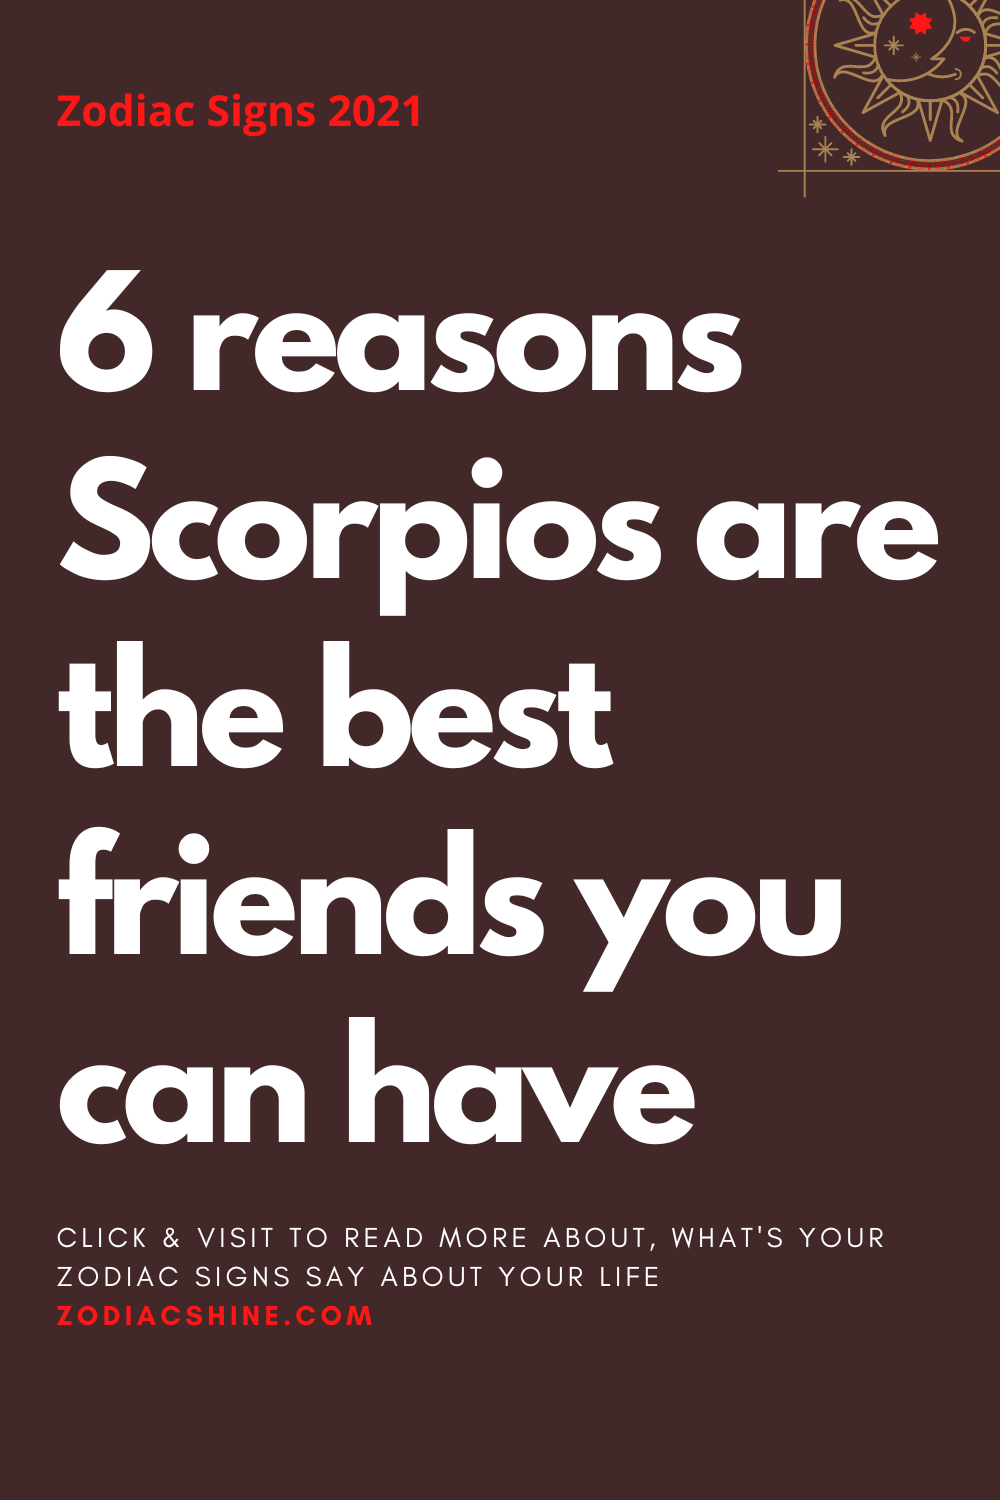 6 reasons Scorpios are the best friends you can have